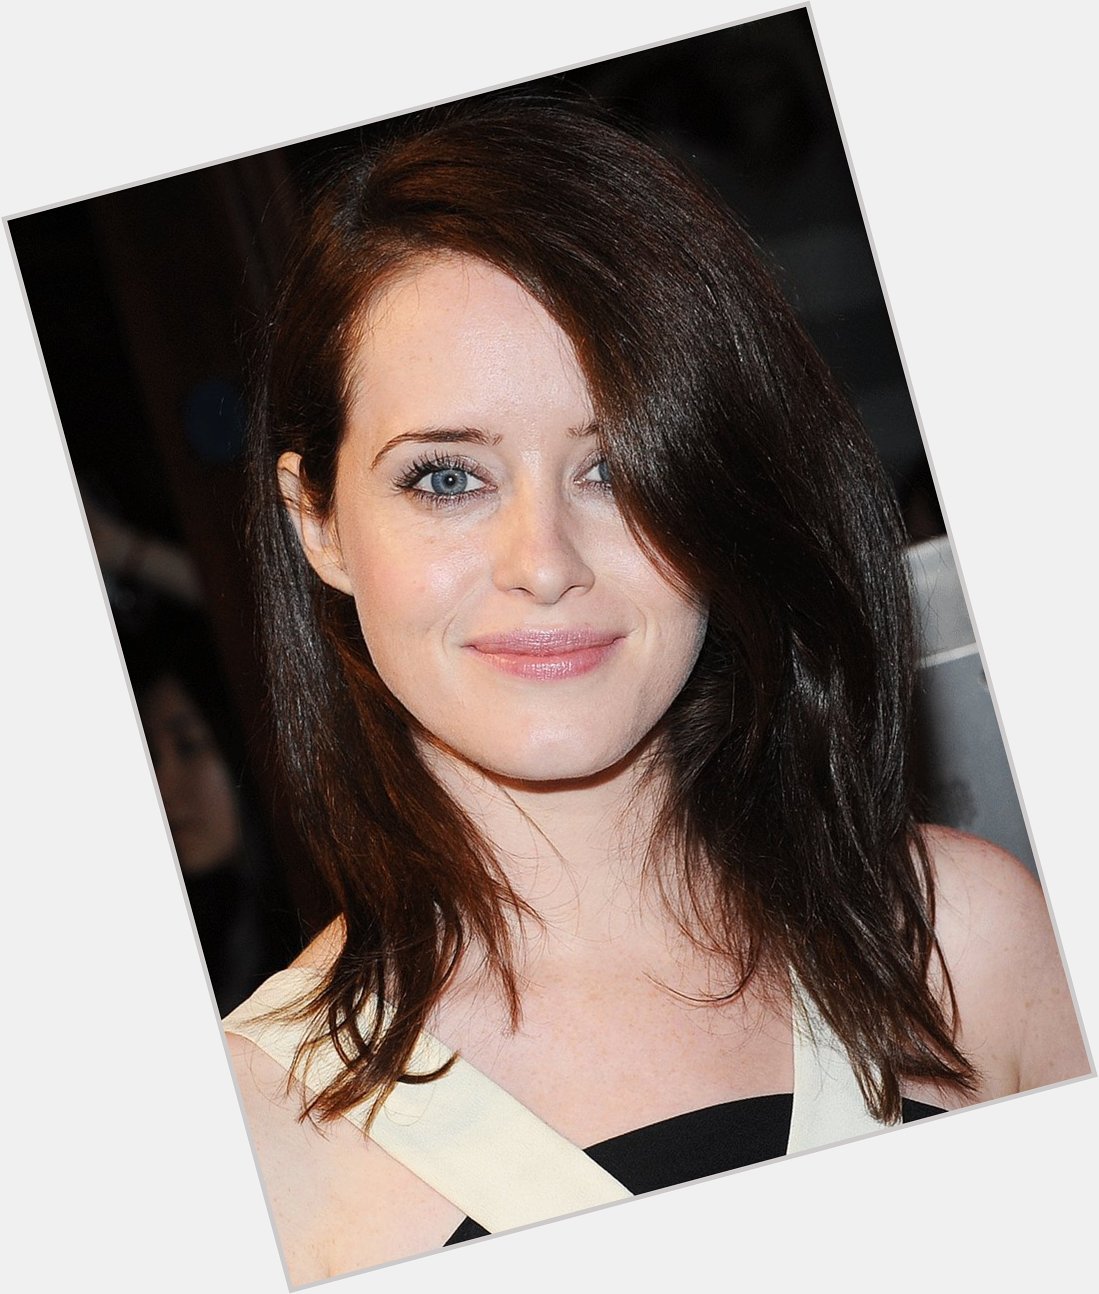 Happy Birthday to the most underrated celeb in my opinion, Claire Foy! 